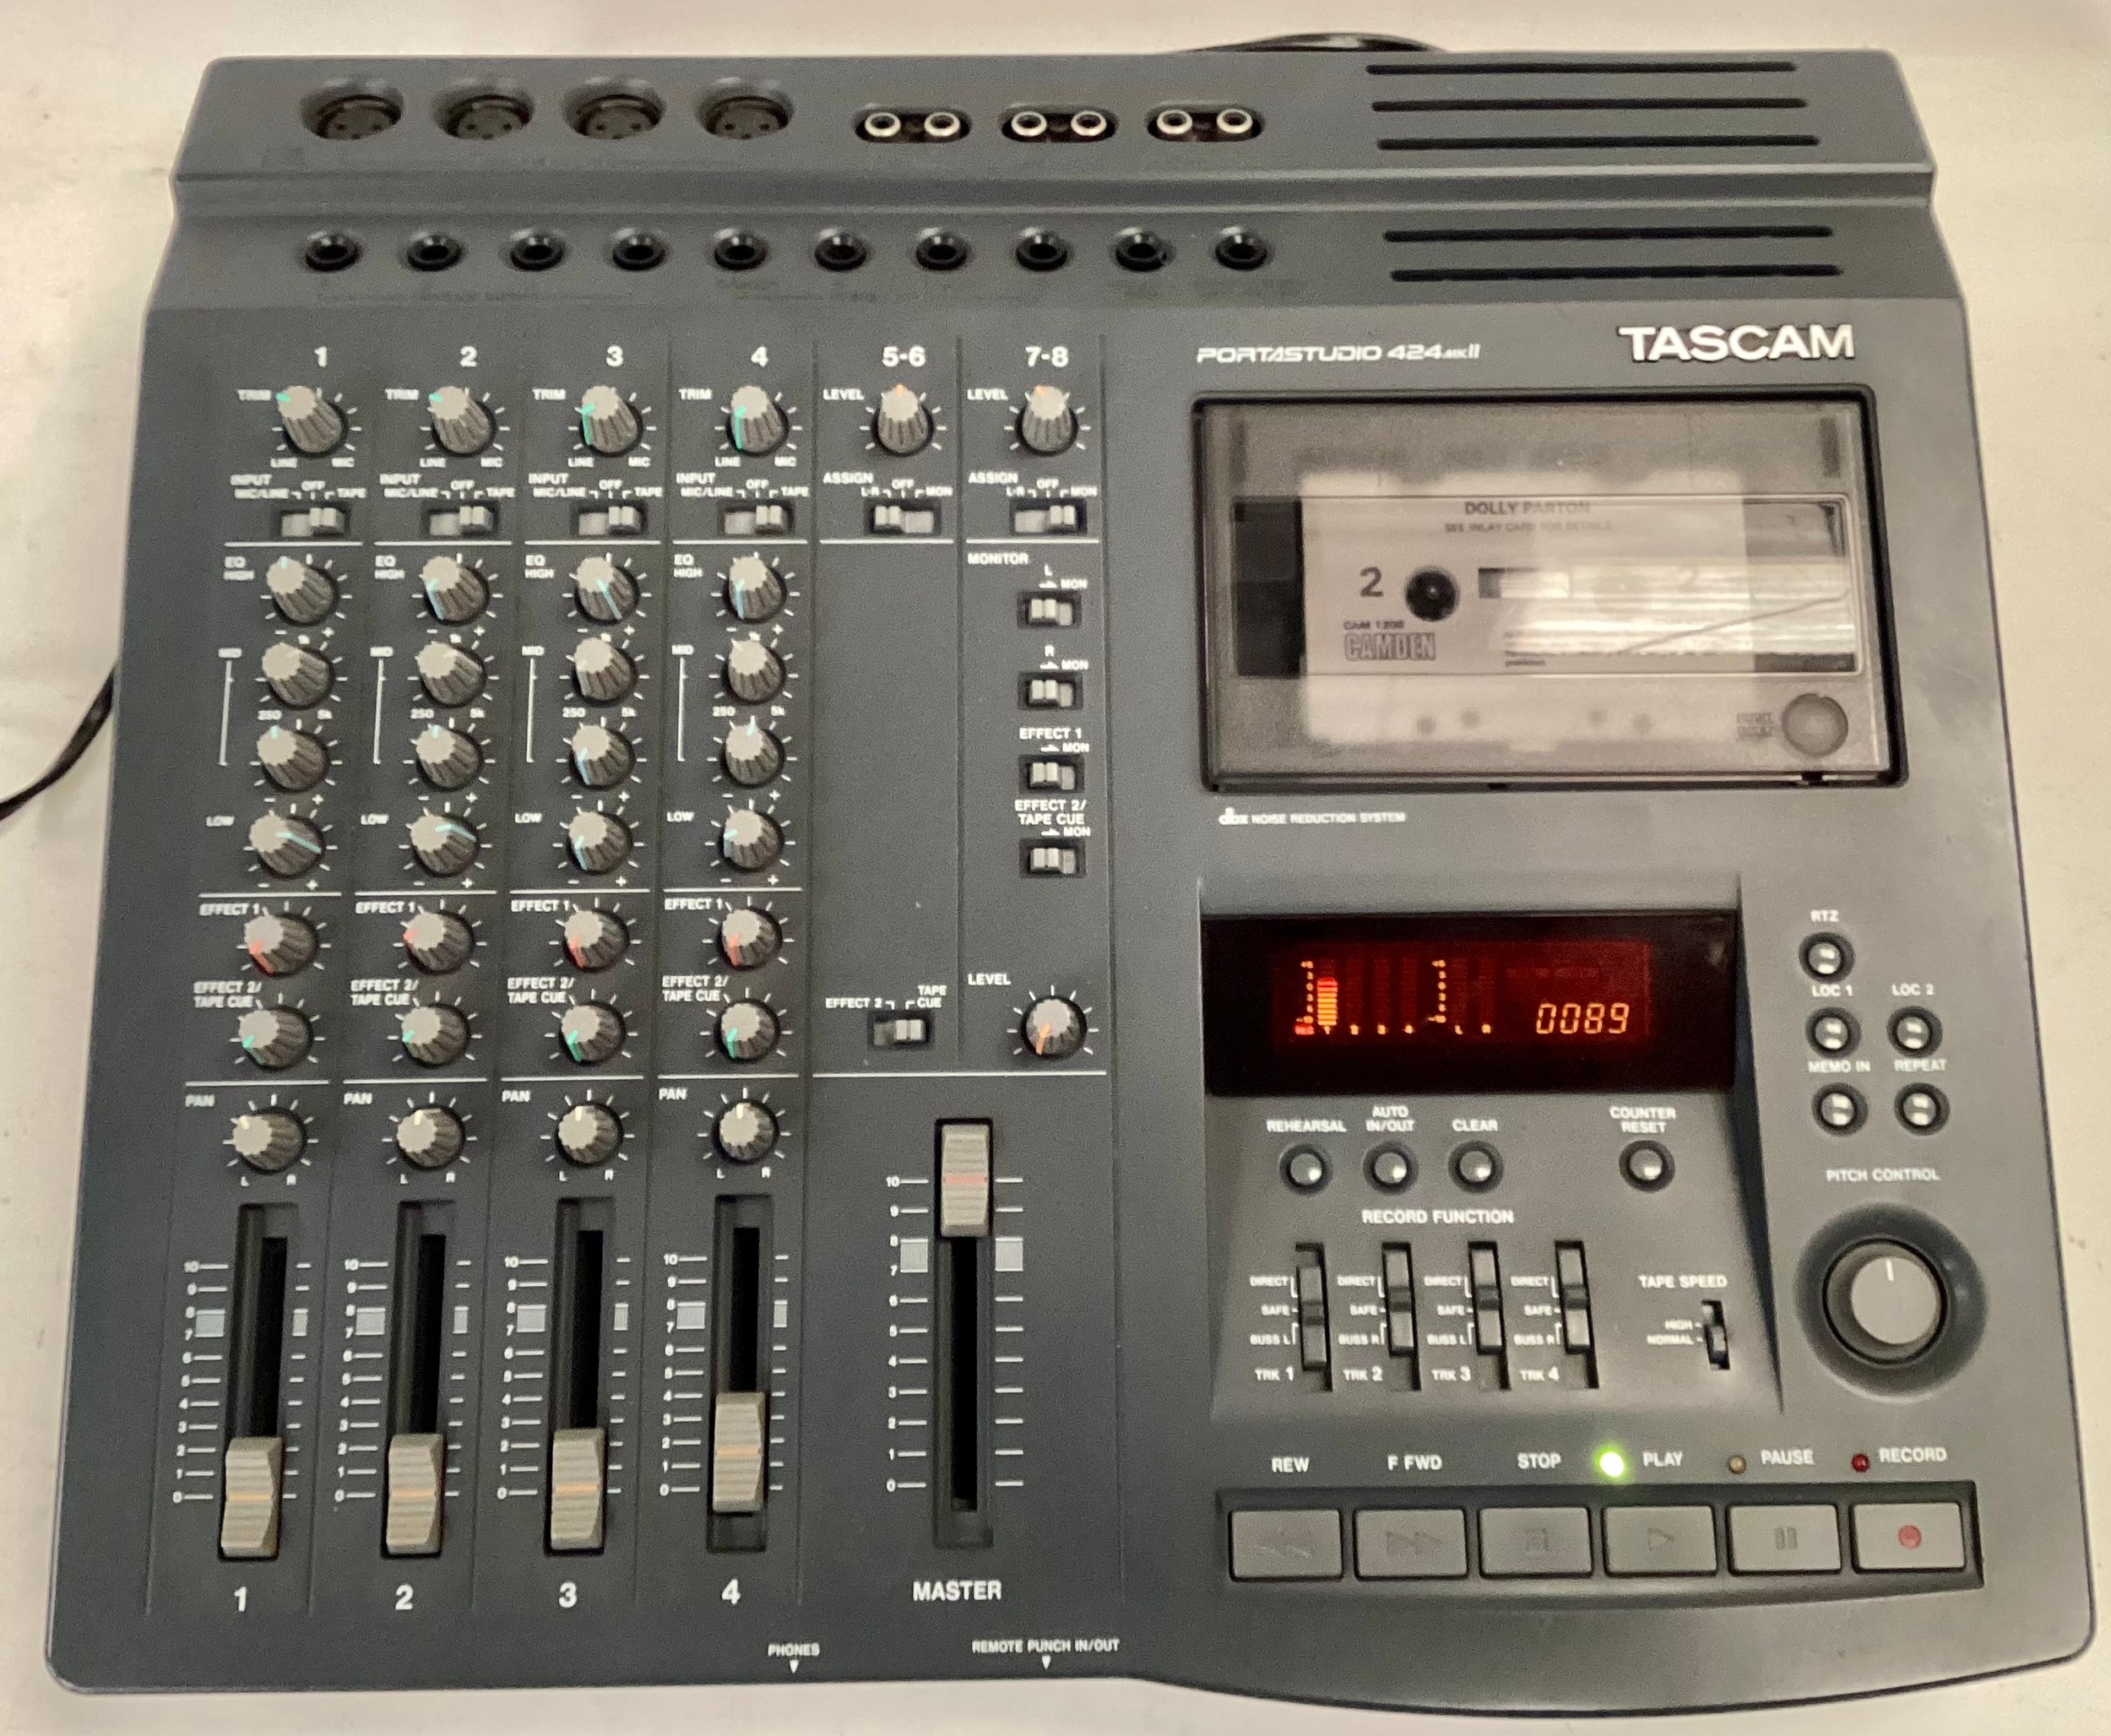 TASCAM PORTASTUDIO 424 Mk2. Nice tidy mixing desk with cassette recorder built in. Has many inputs